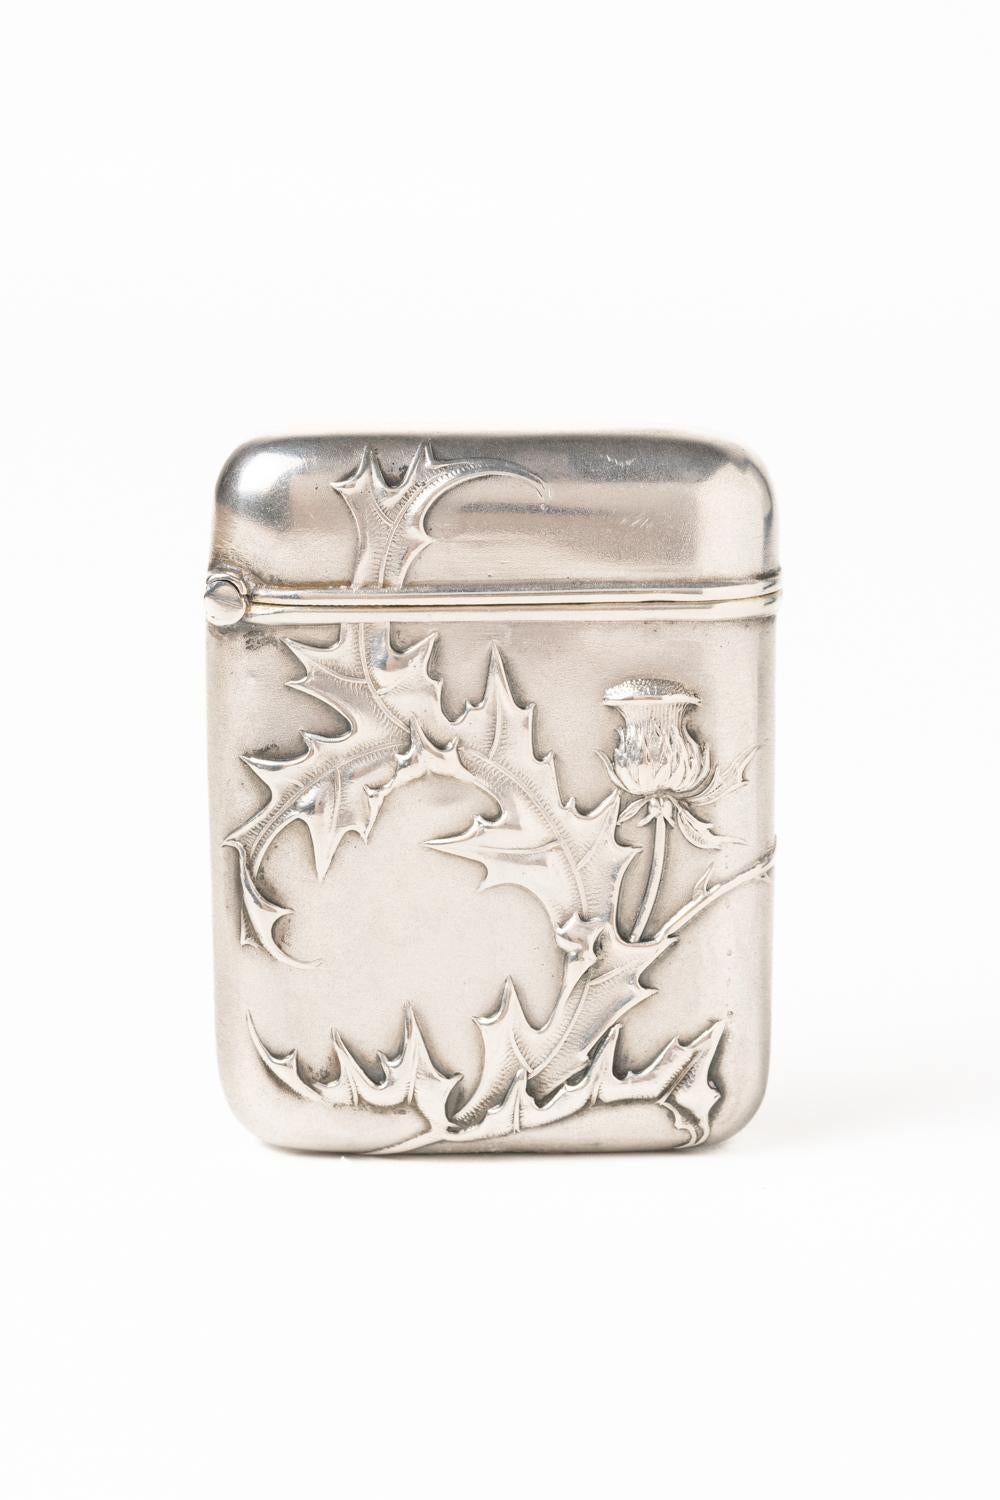 Antique Art Nouveau/Jugendstil German Rare Sterling Silver Vesta Case decorated with a thistle. The piece is embossed throughout with thistle flower and leaves; it has round corners and a gilt-wash interior. The thistle is a symbol of protection,